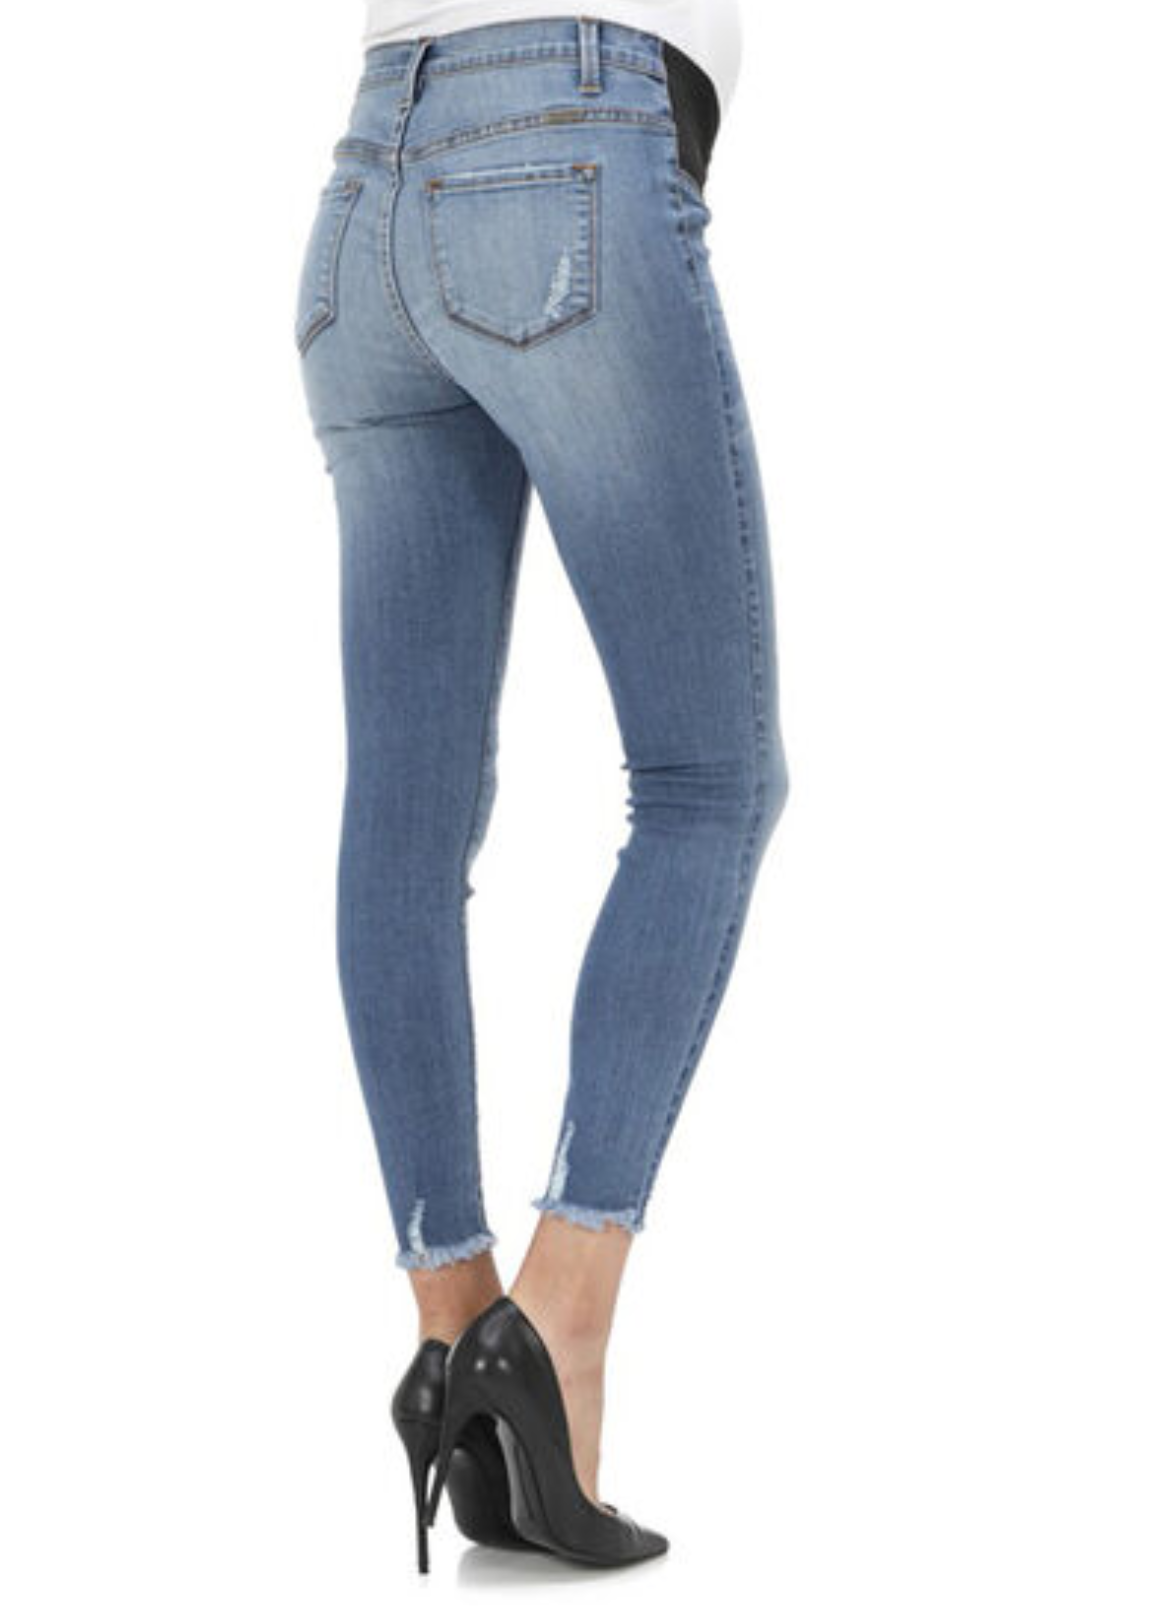 Maternity Jeans Canada  Shop Latest Trend of Skinny Maternity Jeans Online  – Seven Women Maternity